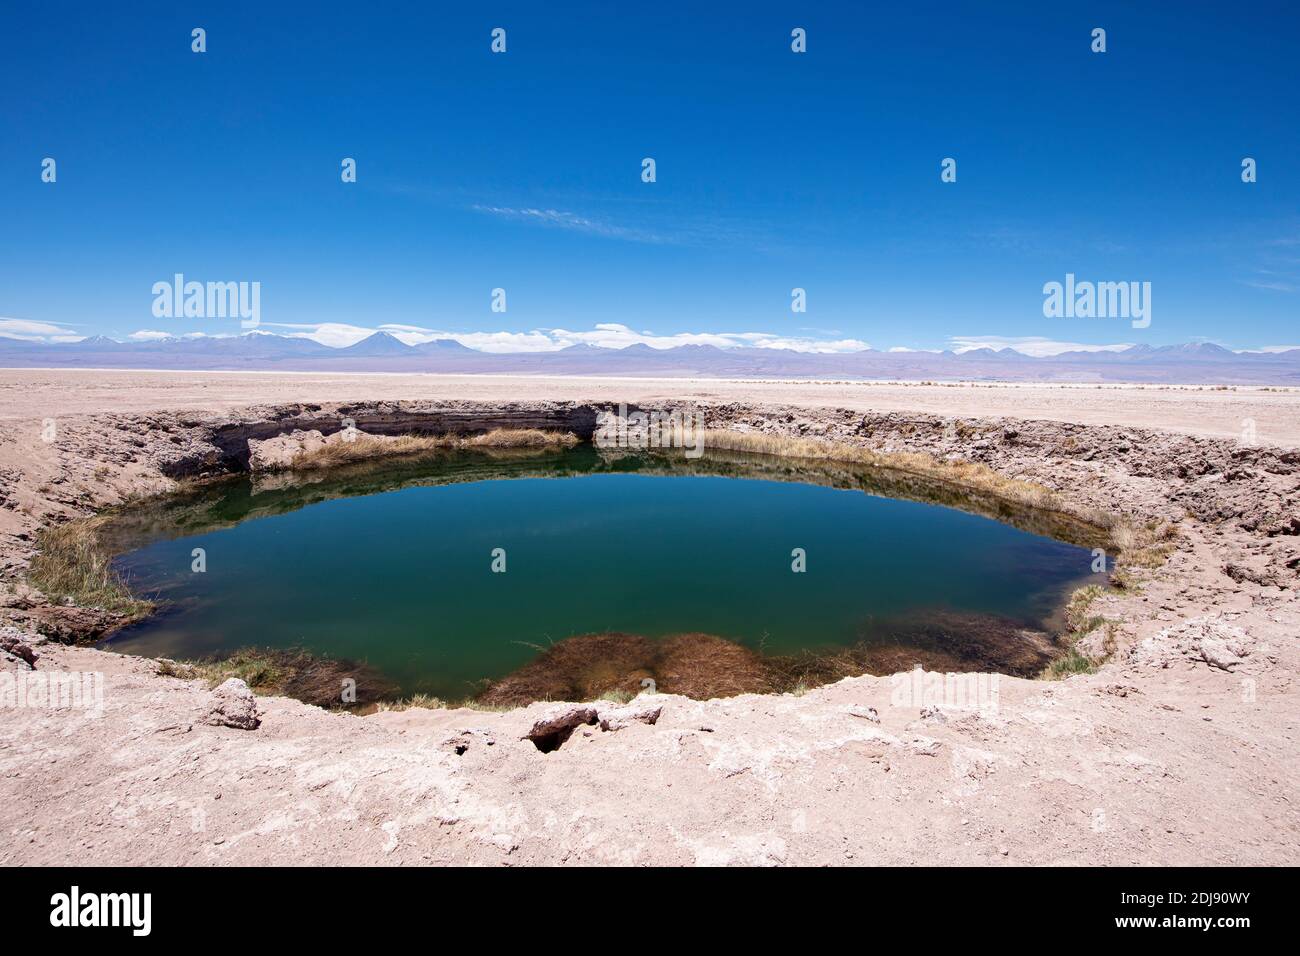 A small flooded sink hole in the Salar de Atacama, Los Flamencos National Reserve, Chile. Stock Photo